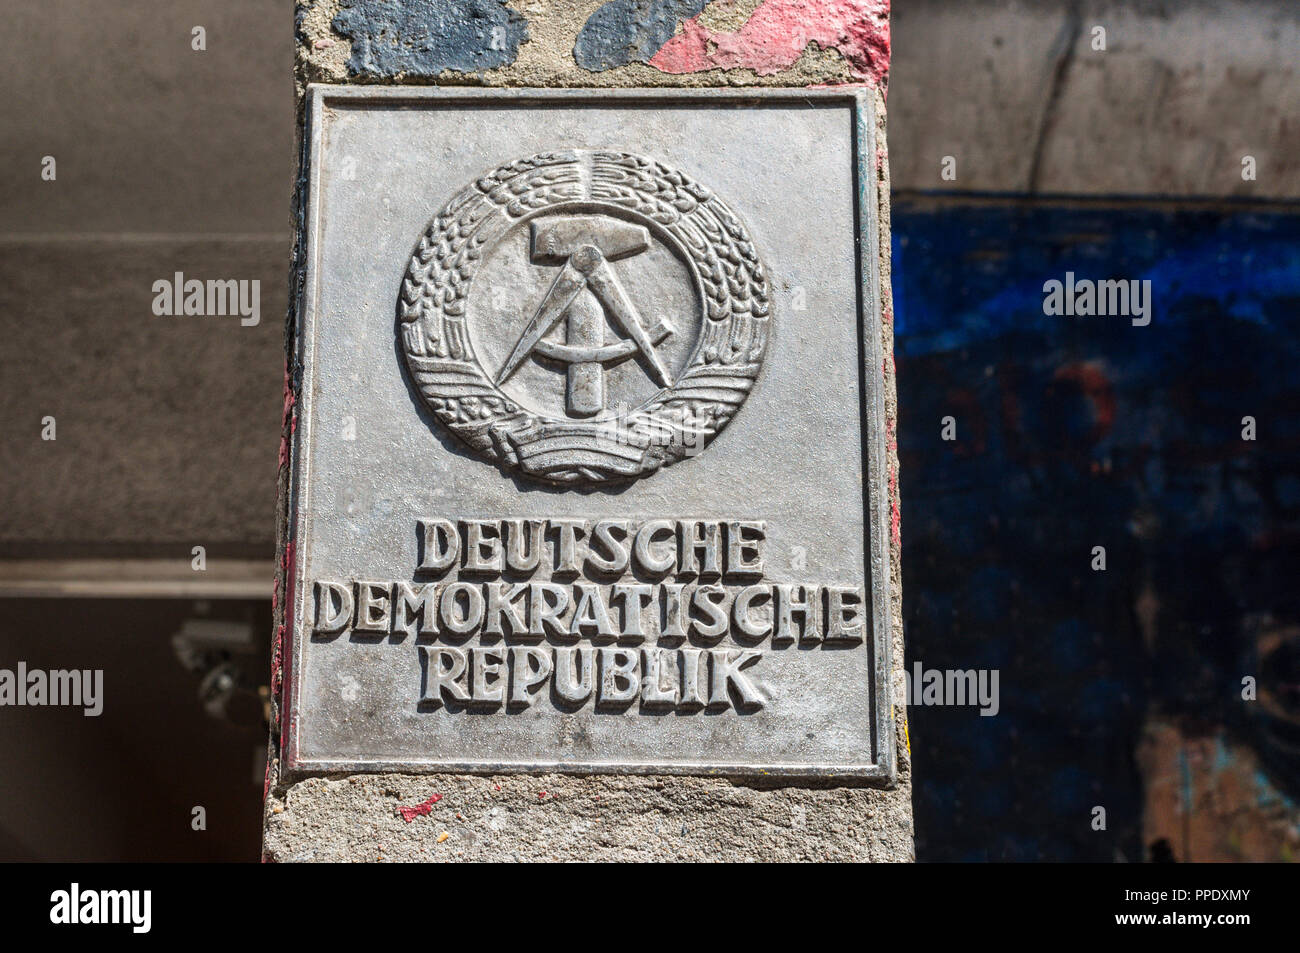 Berlin, Germany - May 28, 2017: The national emblem of the German Democratic Republic or DDR (East Germany) featuring a hammer and a compass, surround Stock Photo